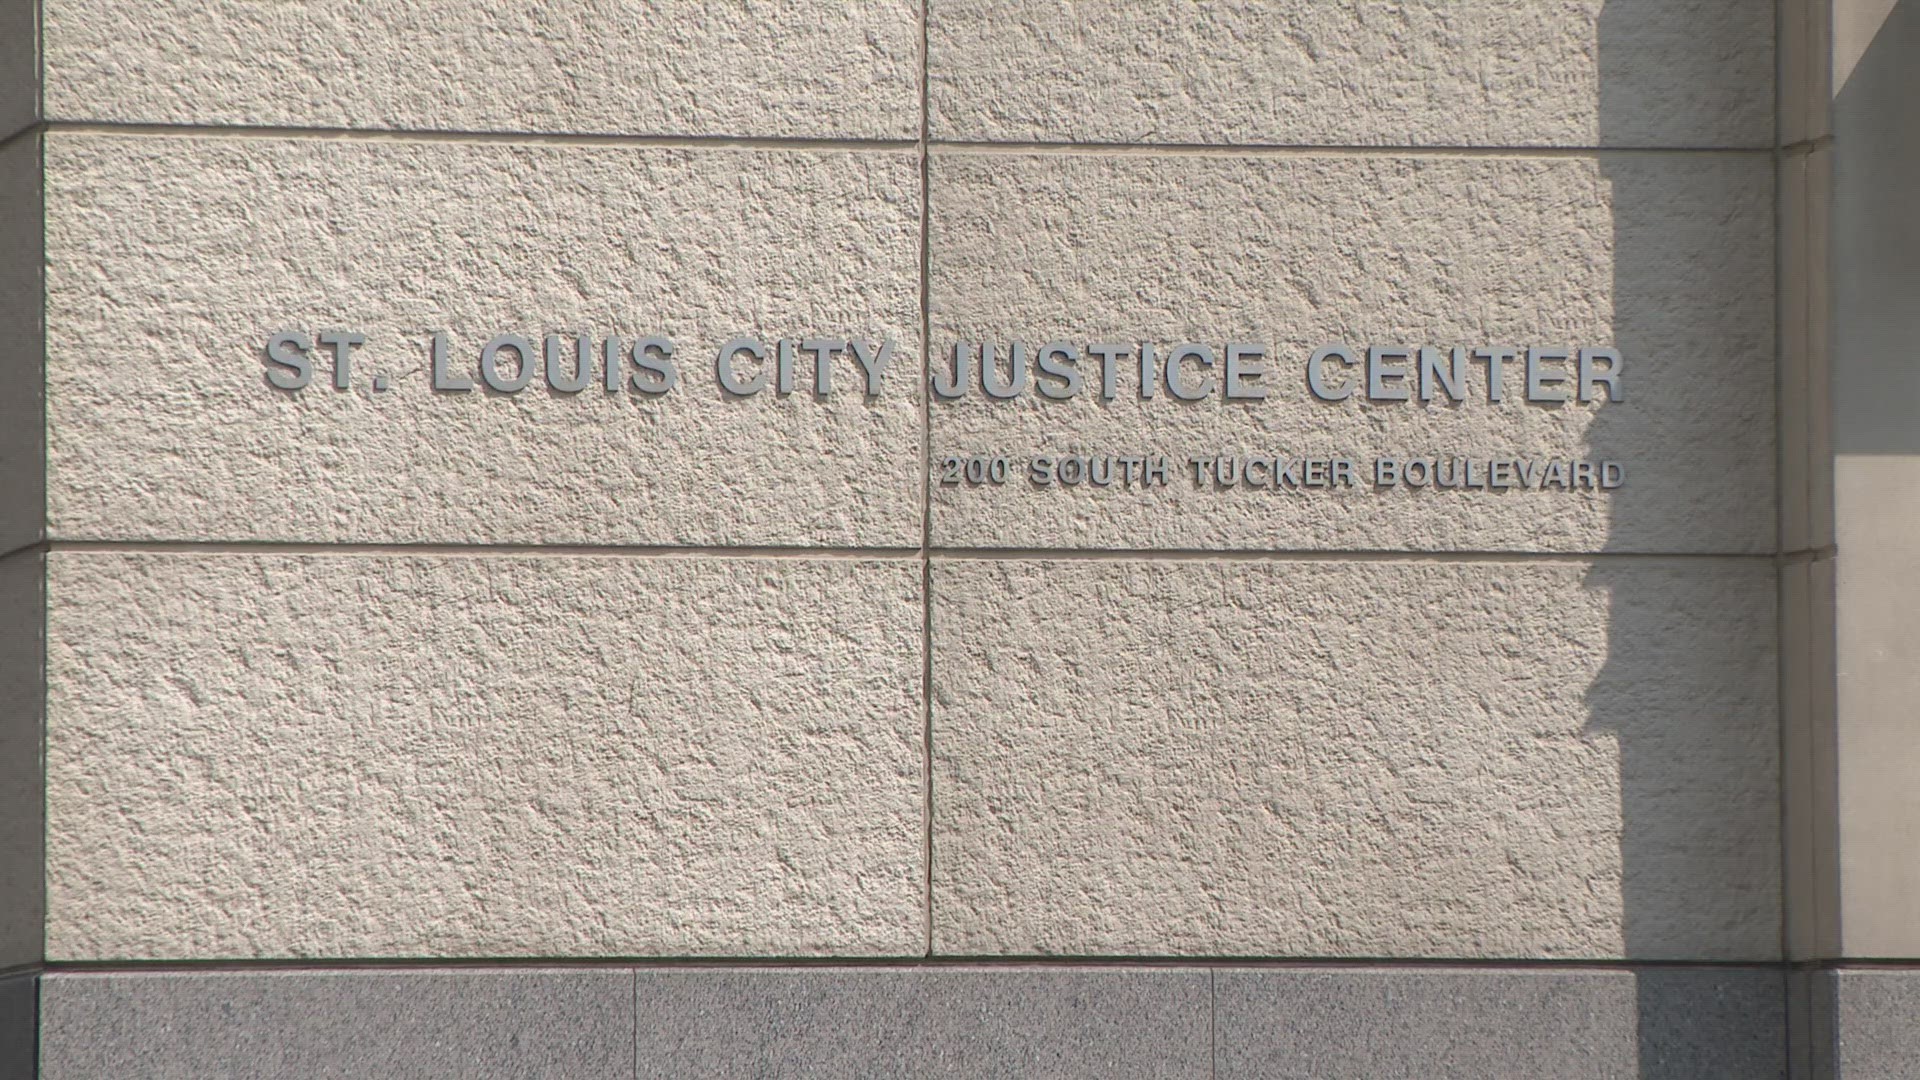 An inmate at the St. Louis Justice Center died in custody Sunday night after city officials say he suffered a medical emergency.